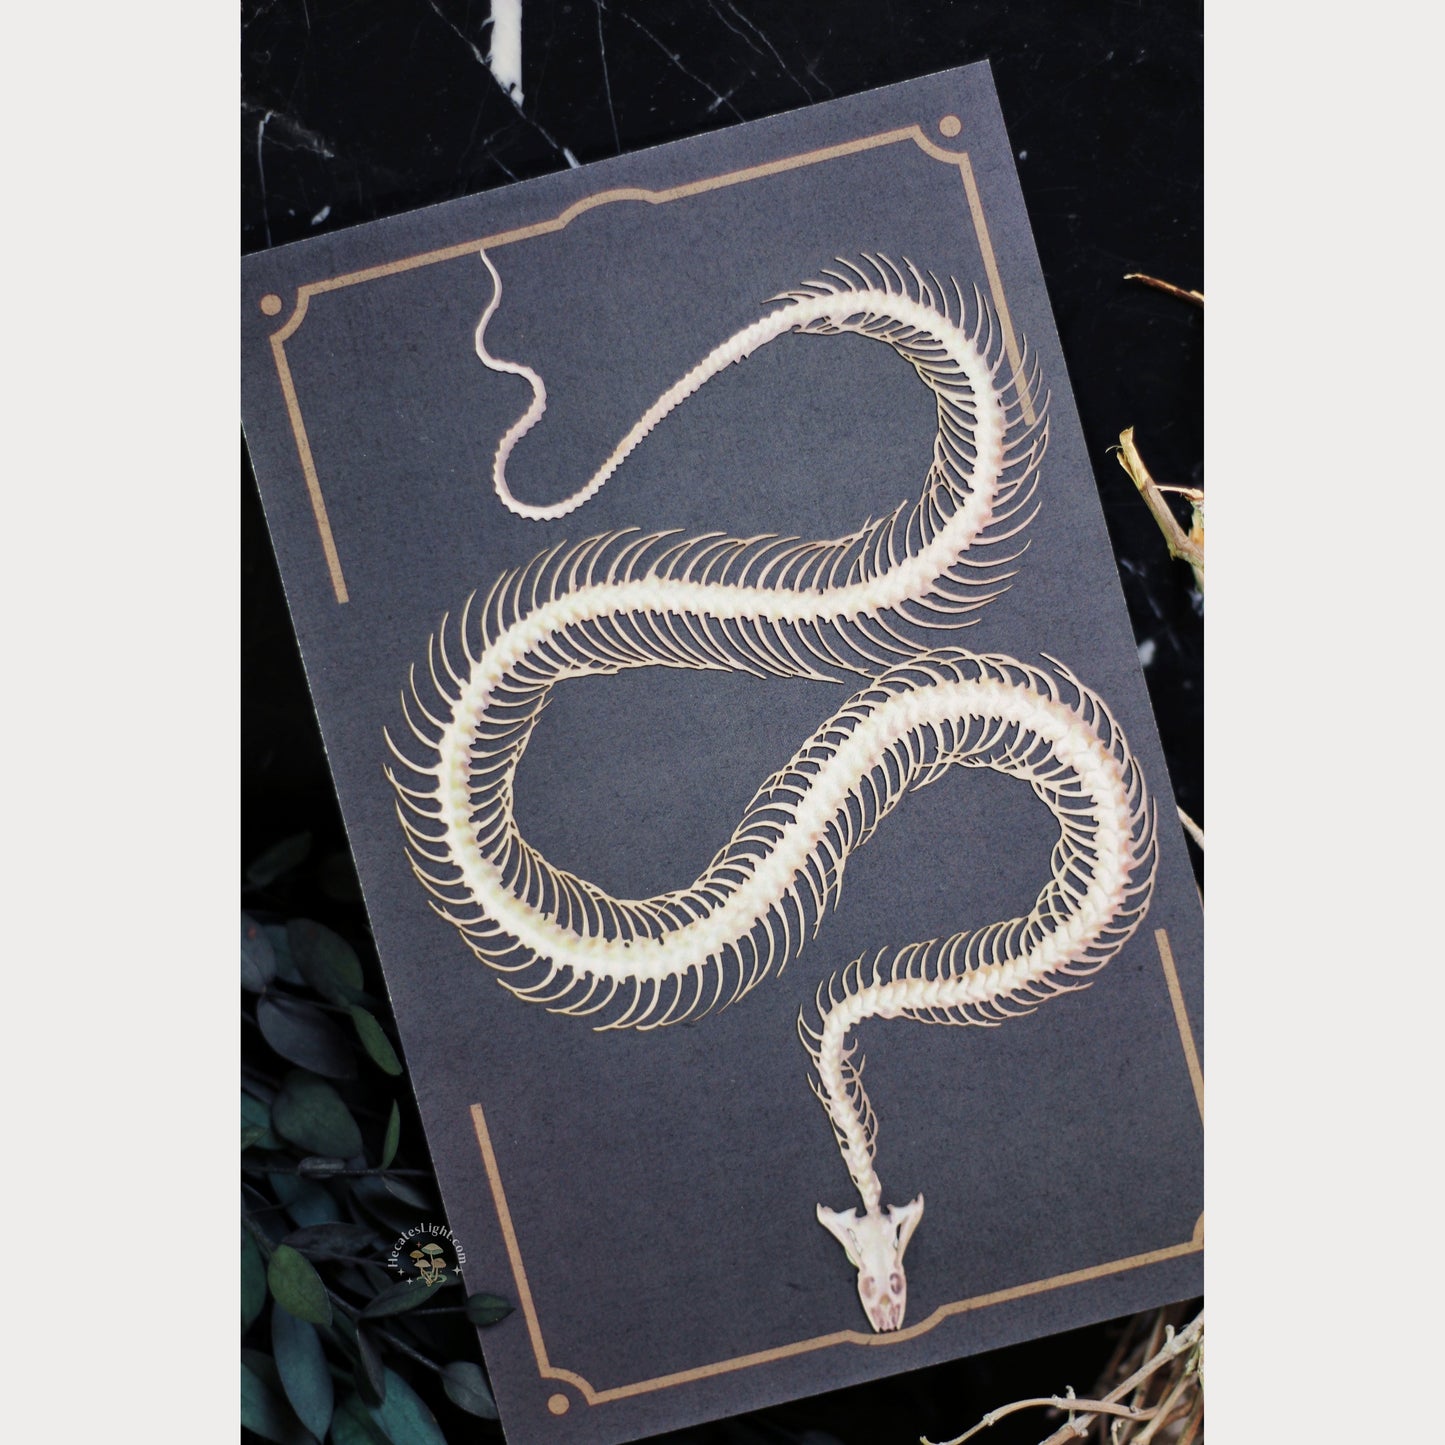 Temptress Snake Skeleton Moth & Myth art, art display, decor, decoration, decorative, moth, moth and myth, paper, replica, serpent, snake, temptress metaphysical occult supplies witchy hecateslight.com witchcraft cottagecore witch gifts